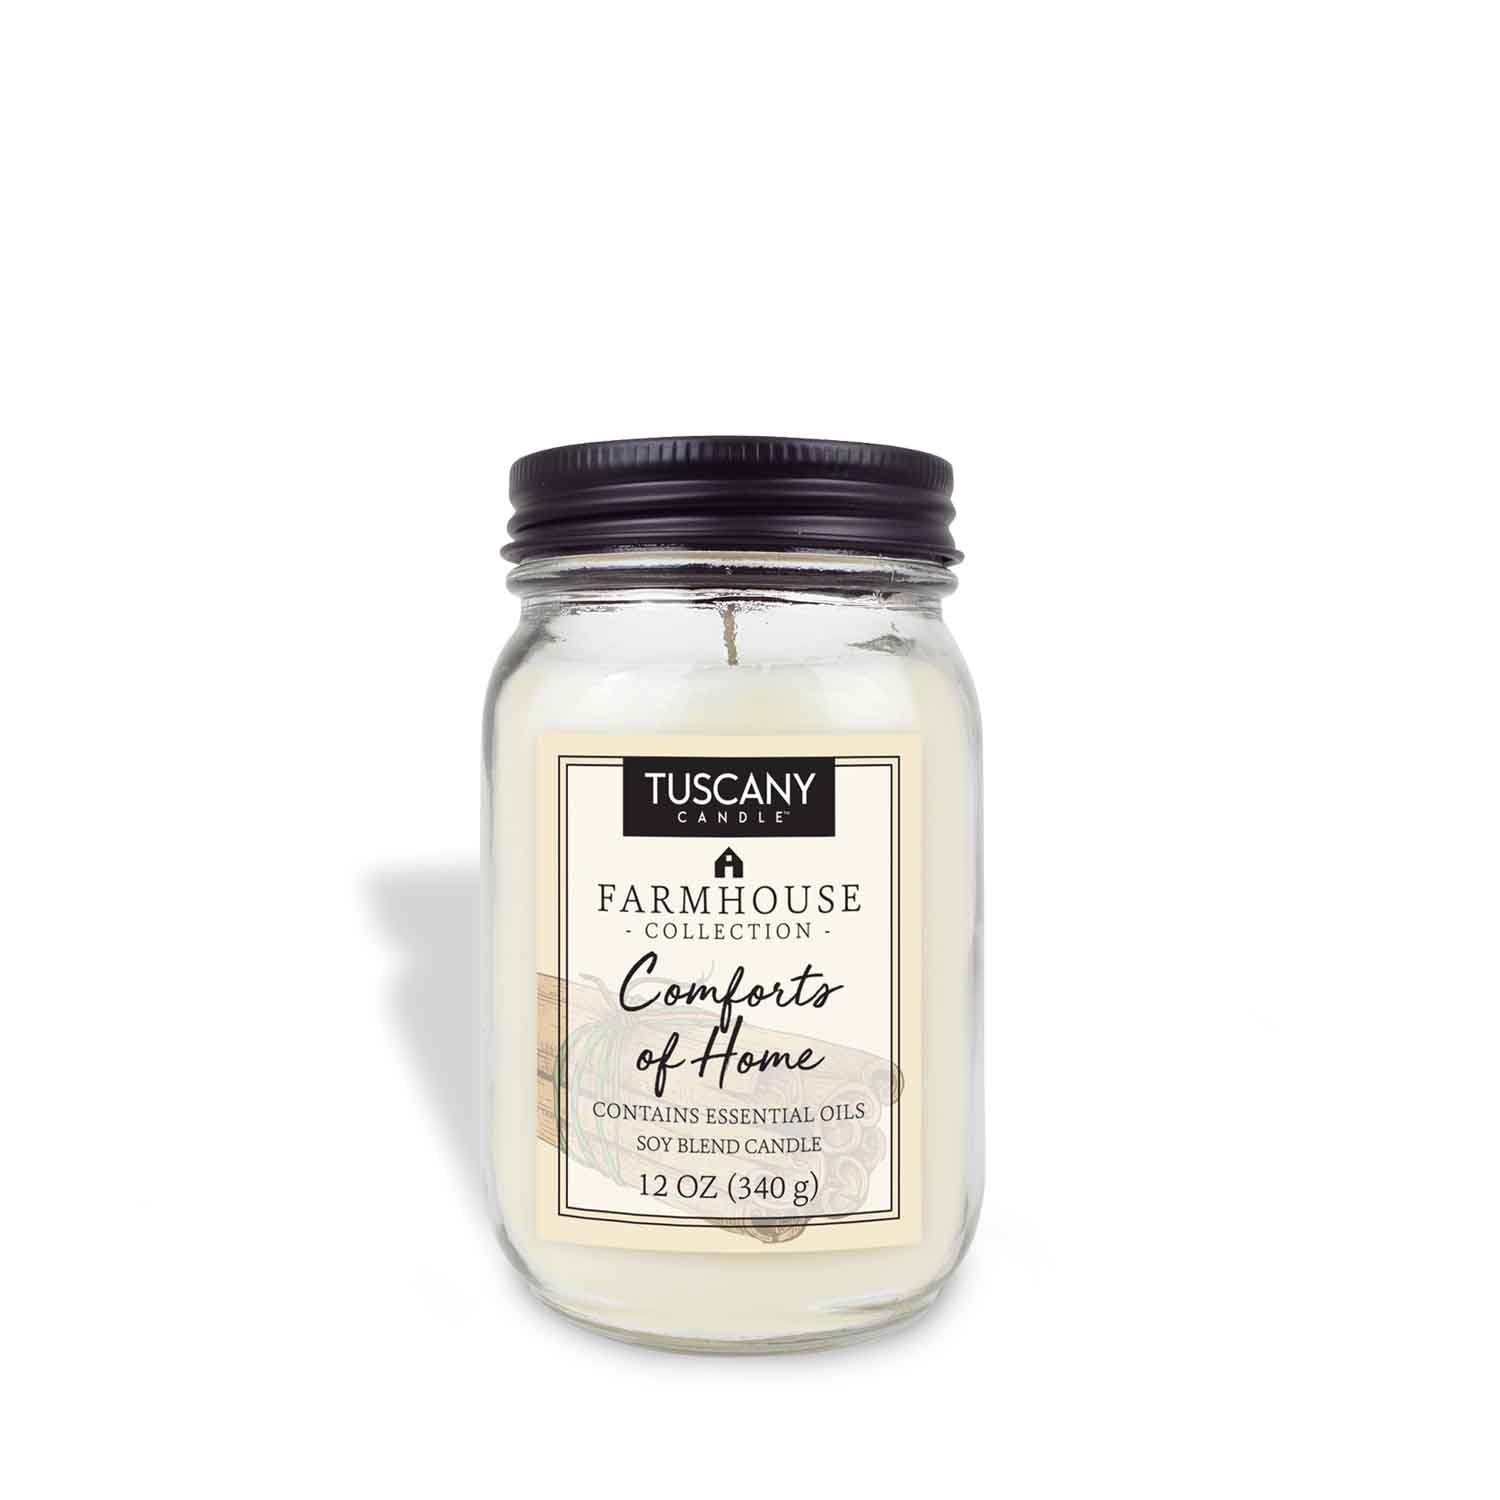 A Tuscany Candle® EVD Comforts of Home Scented Jar Candle (12 oz) – Farmhouse Collection, complete with the aromatic blend of cinnamon, nutmeg, and allspice, creating a warm and inviting atmosphere for any home.